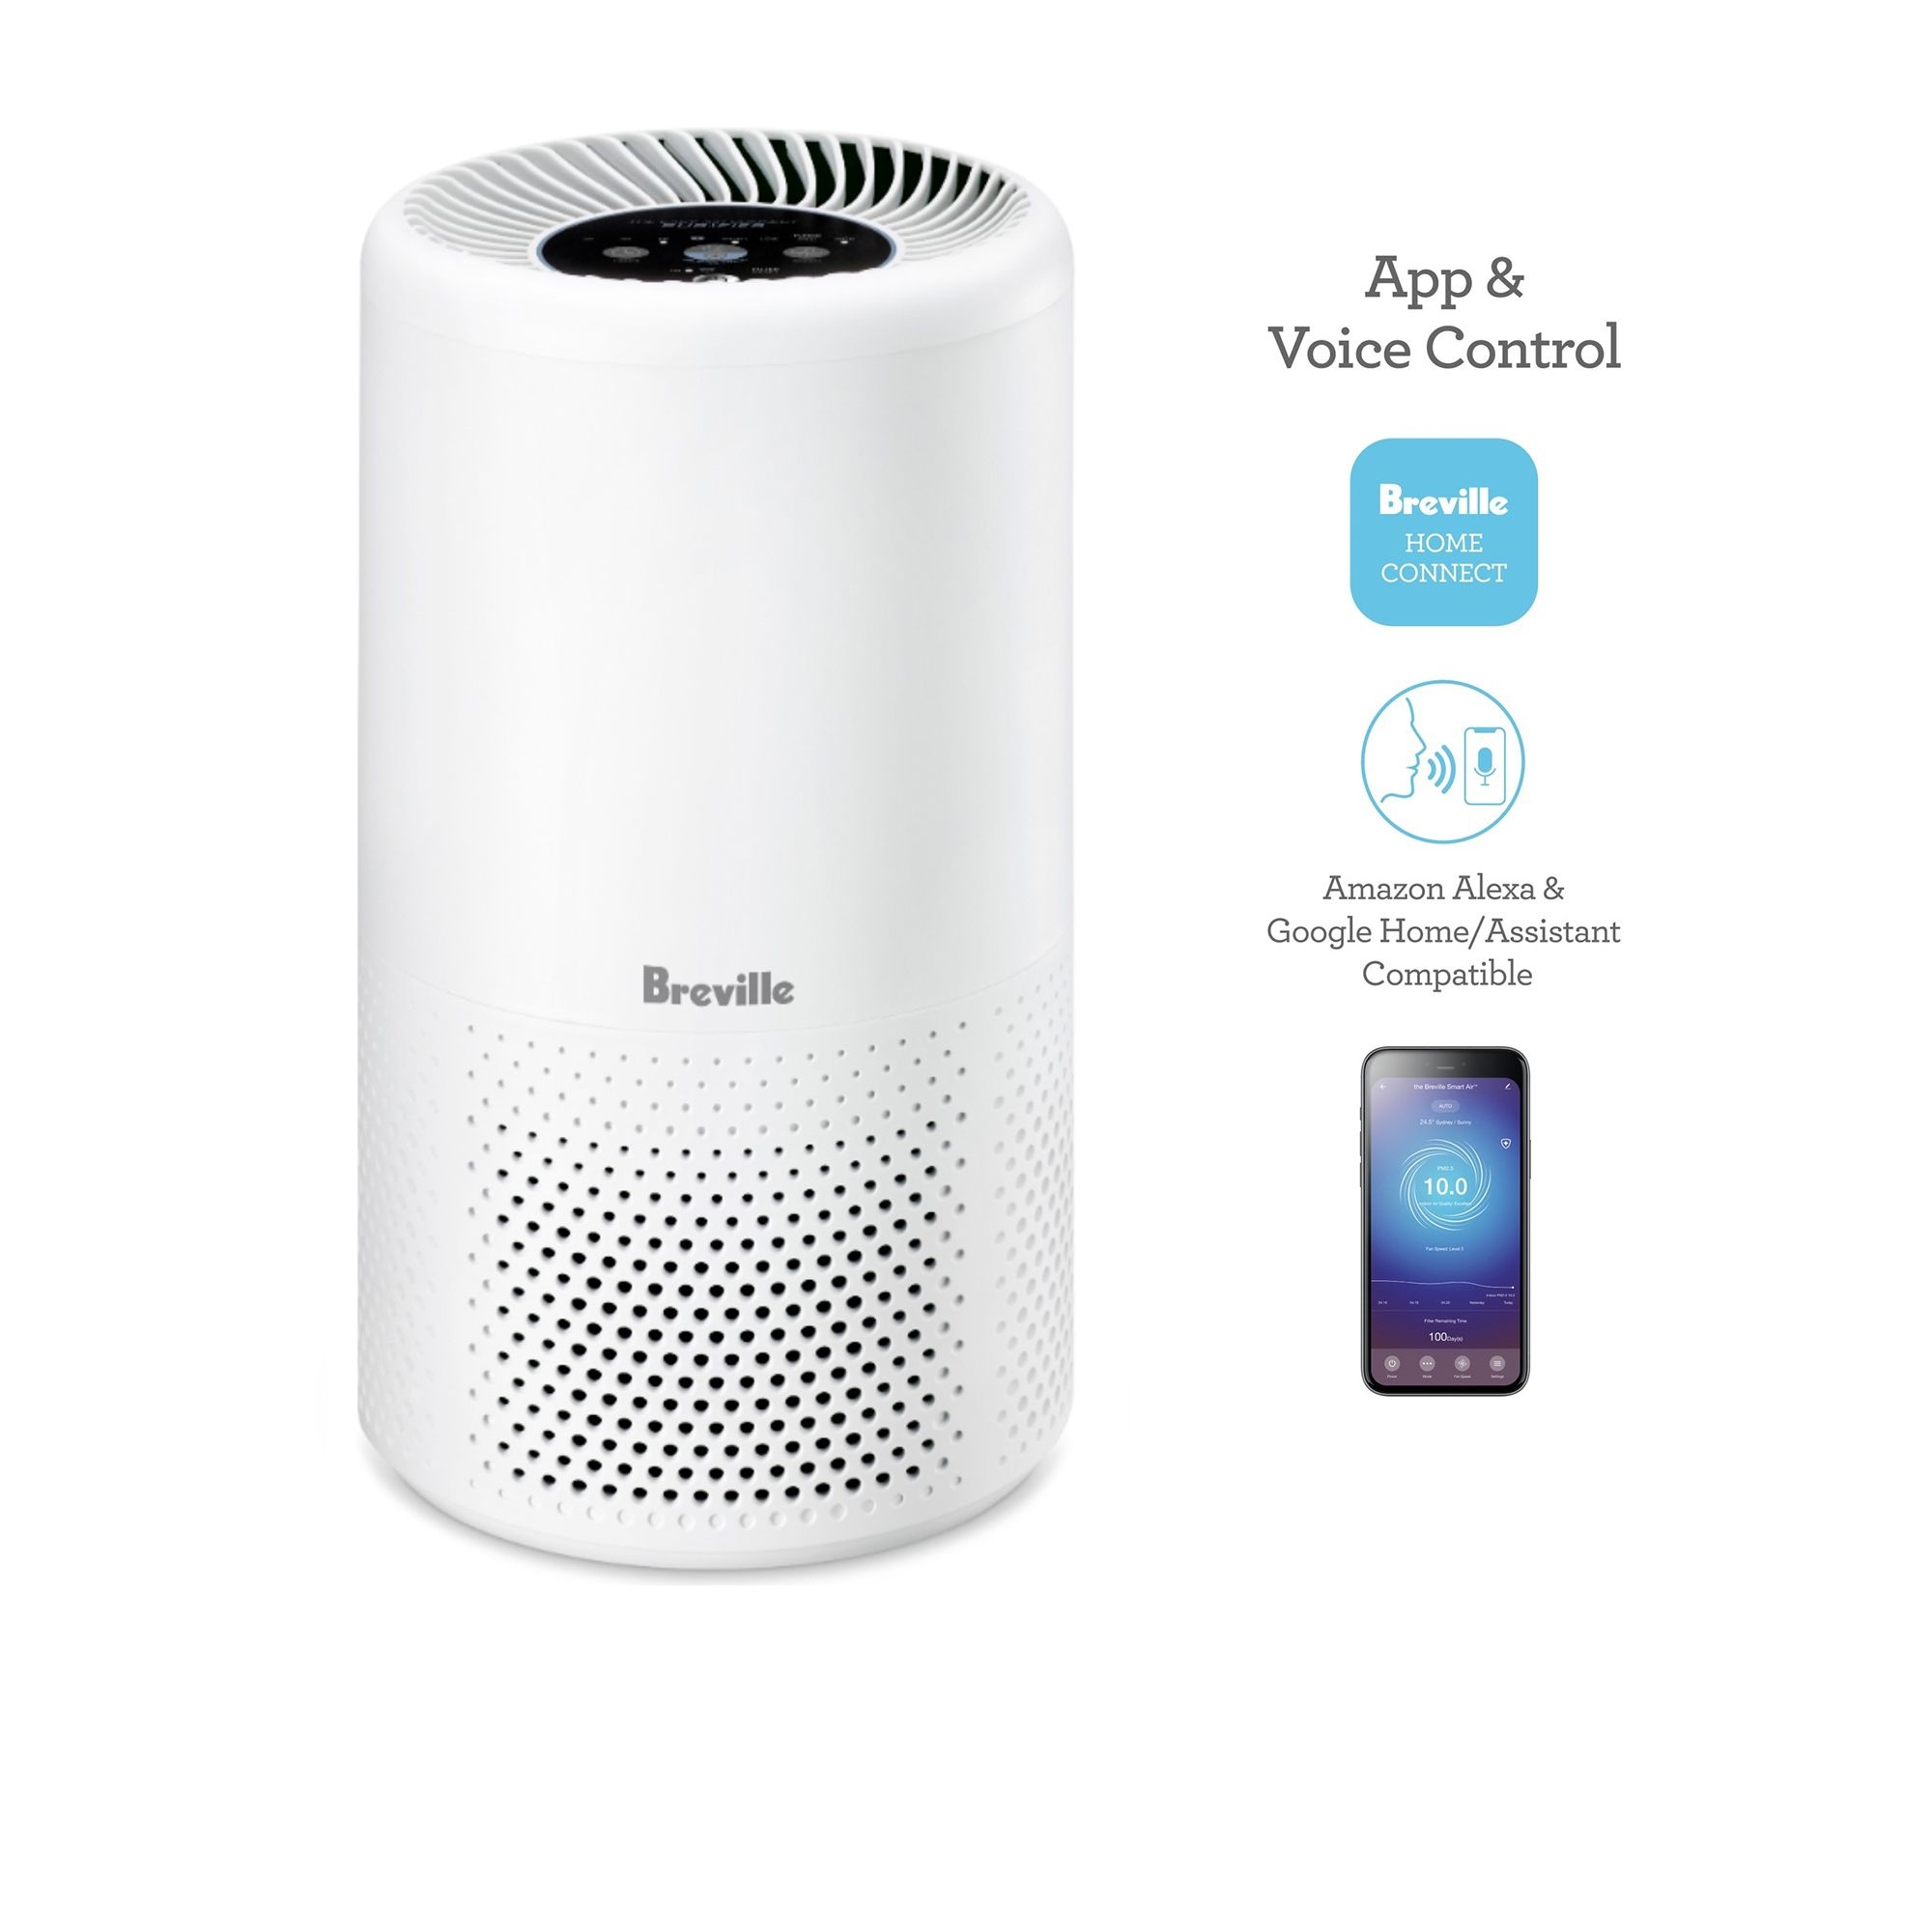 Breville The Easy Air Connect Purifier with Wi-Fi CADR 91m3/h Image 2